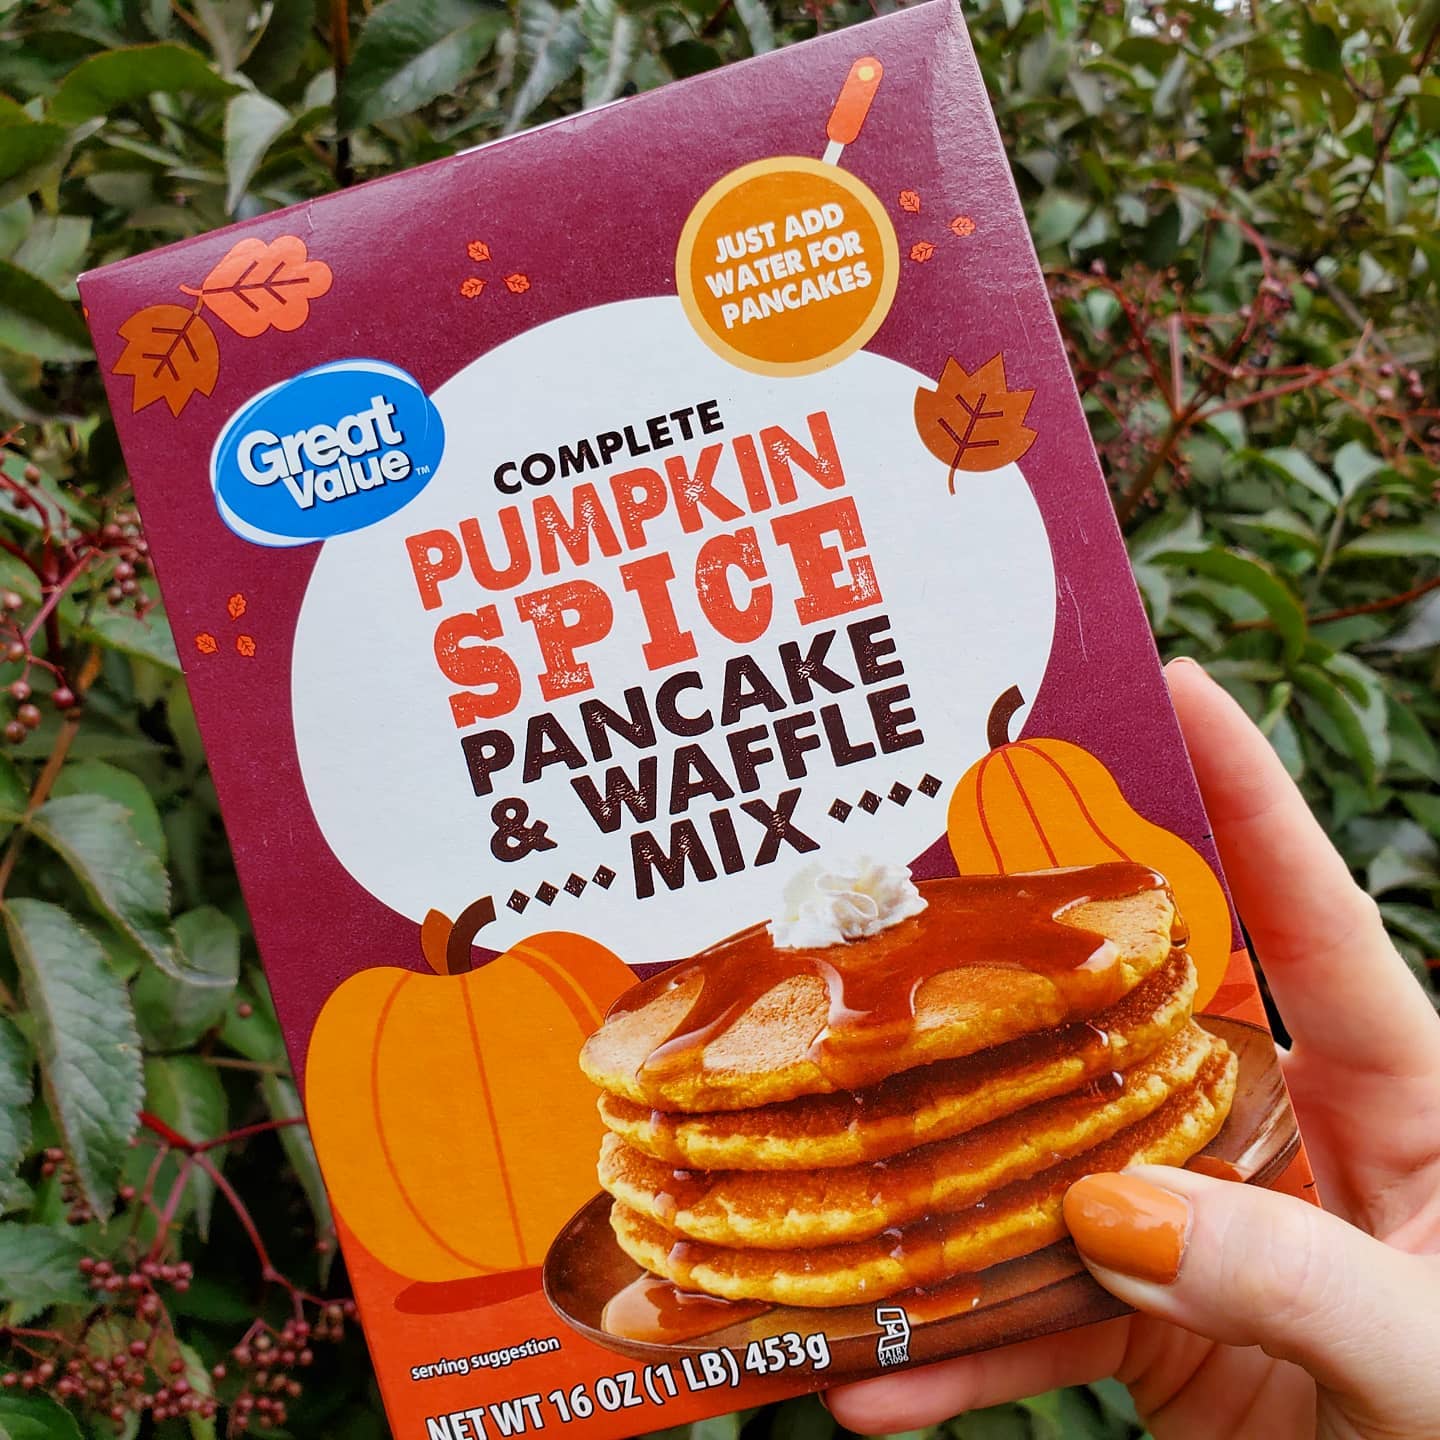 Somebody holding a box of Great Value Pumpkin Spice Pancake and Waffle Mix. Photo by instagram user @junkfoodjunction